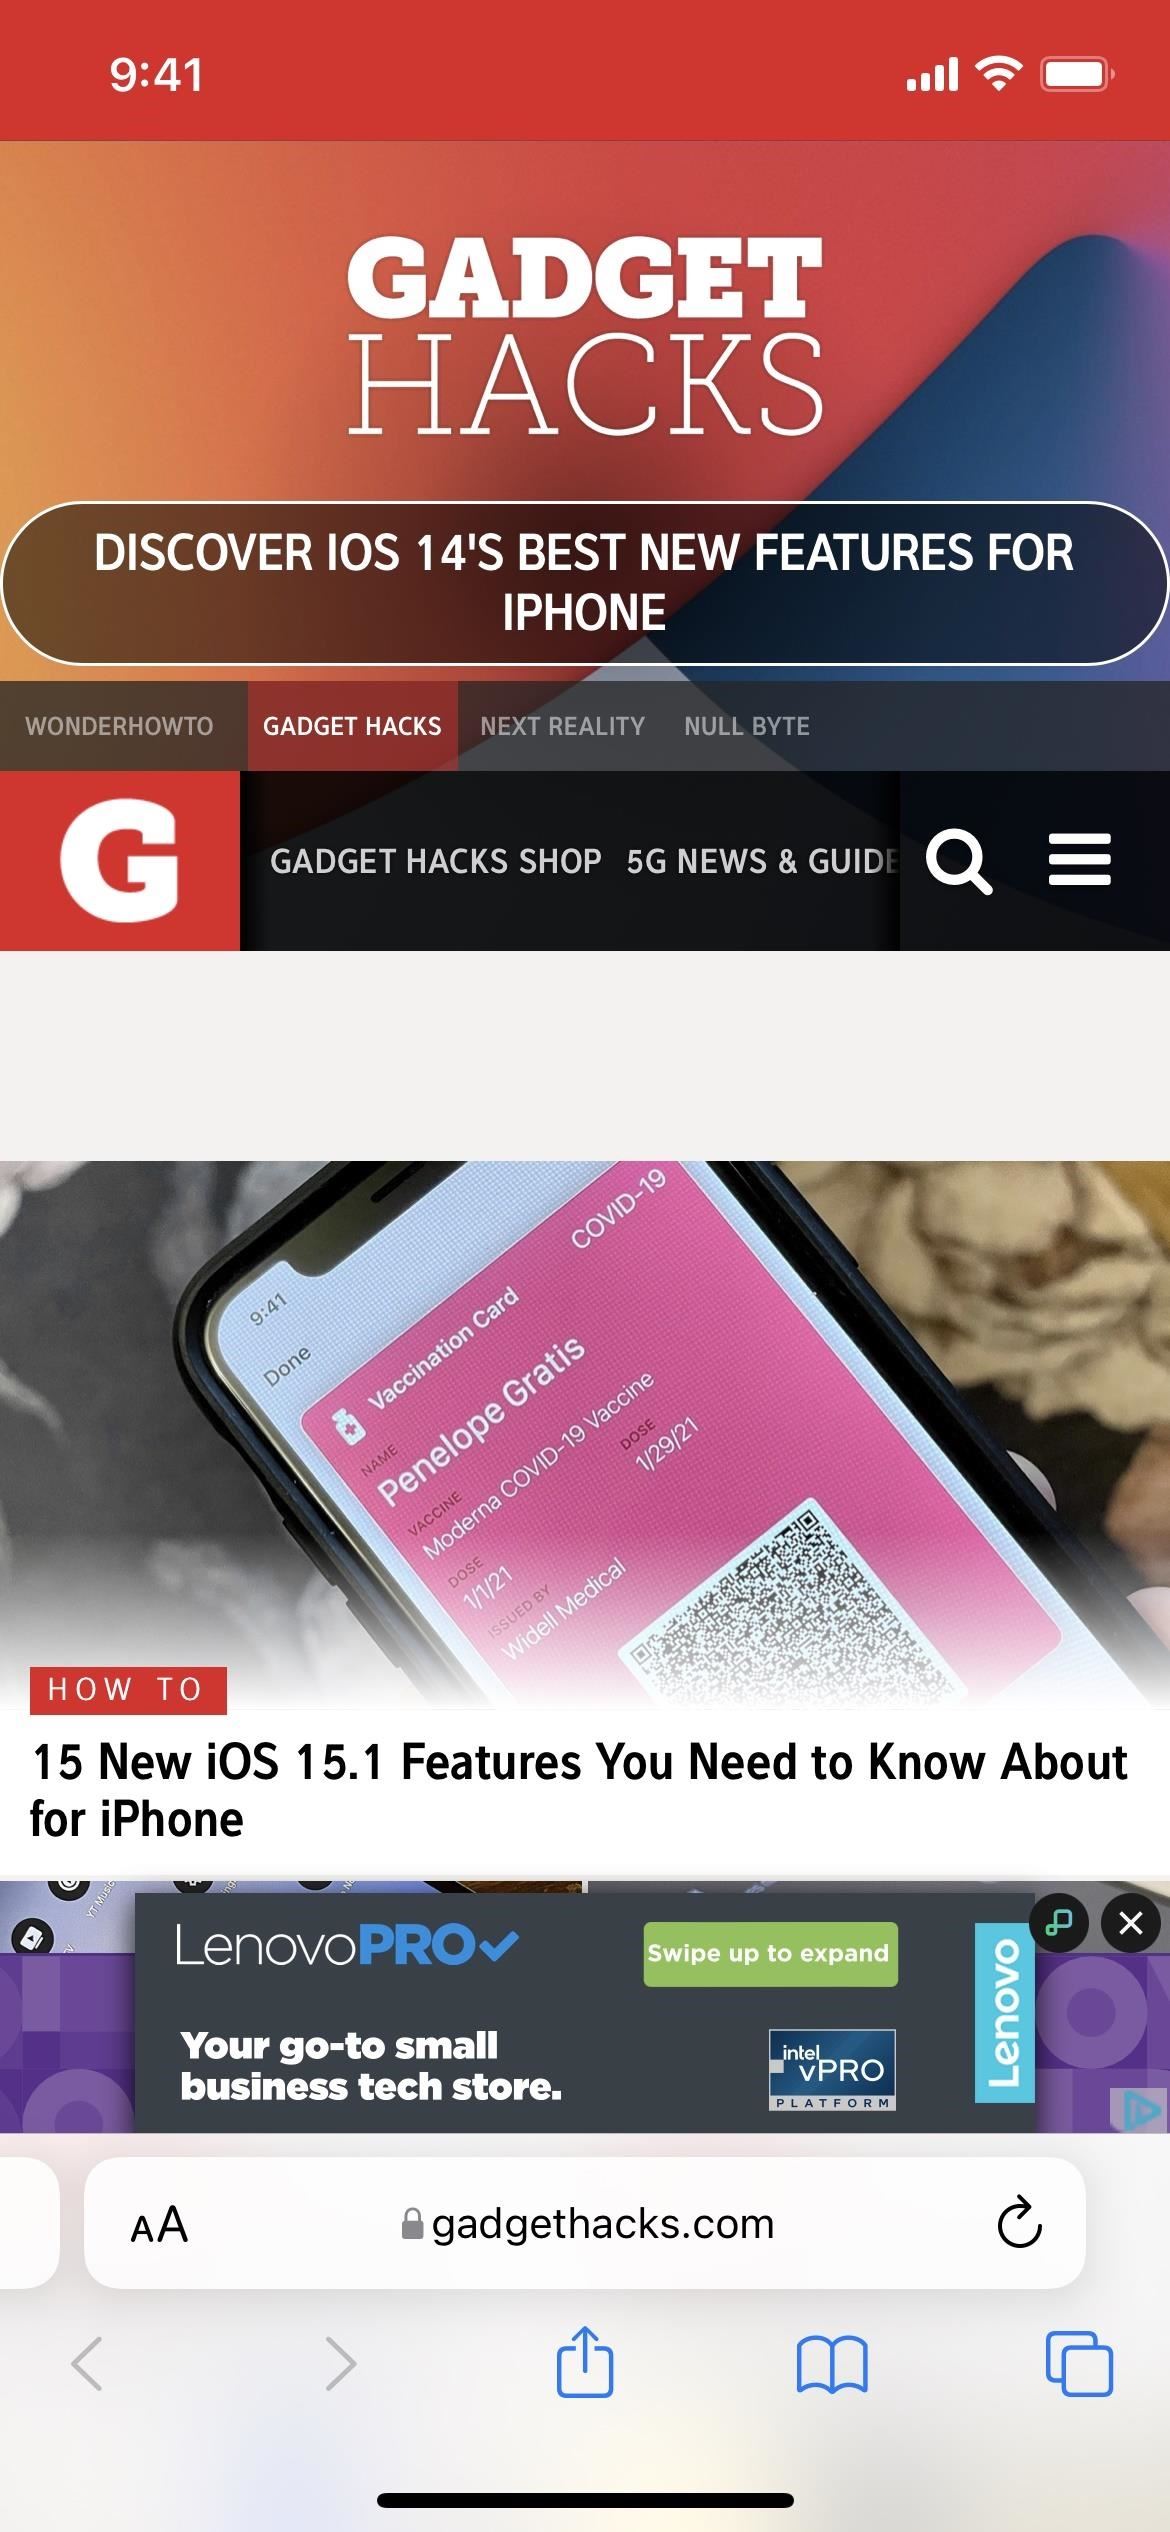 How to Move Safari's Search Bar to the Top of the Screen in iOS 15